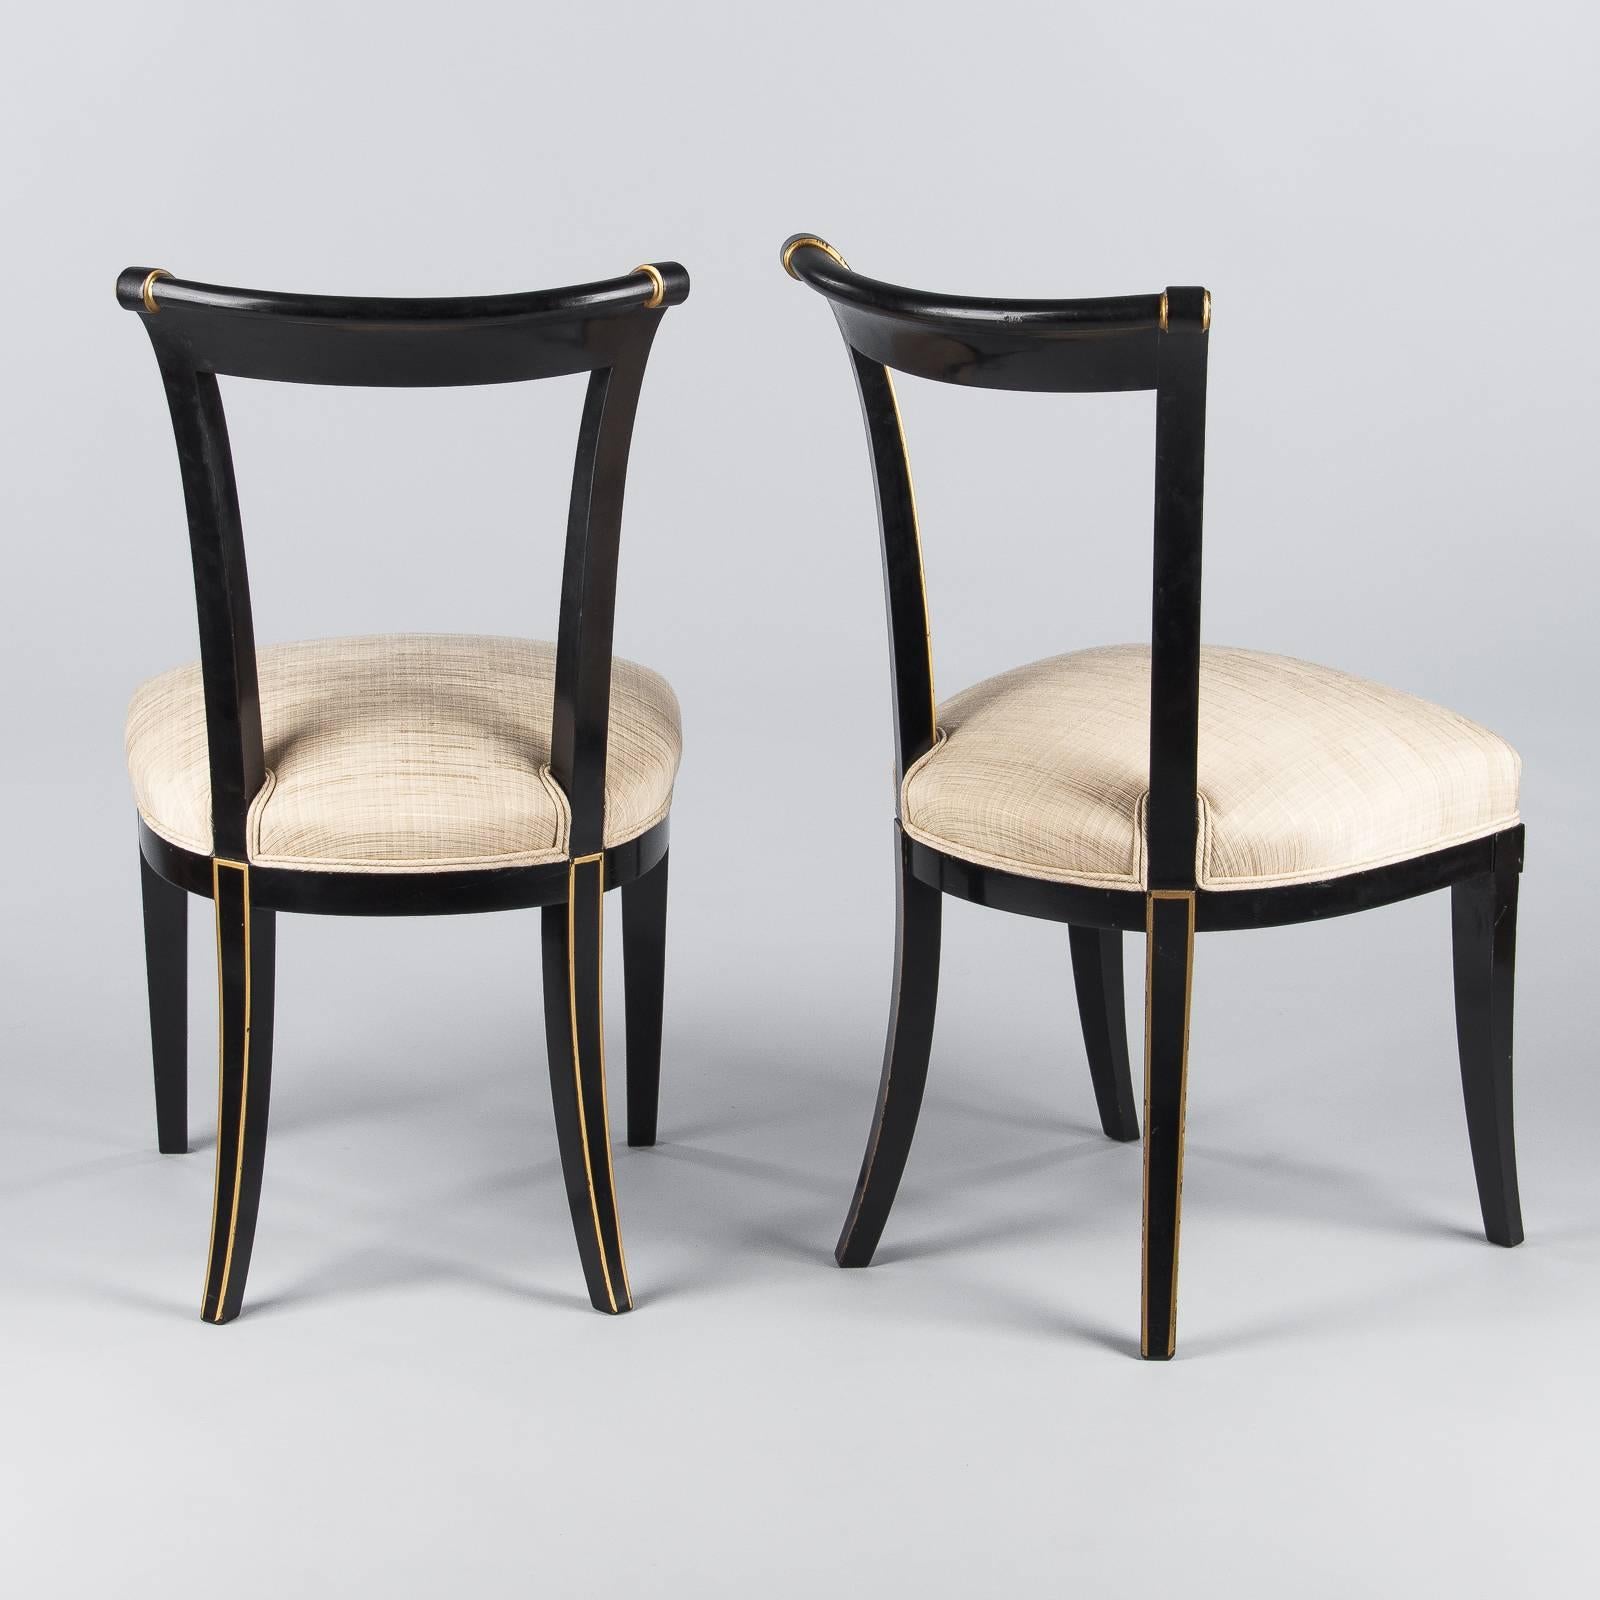 Mid-20th Century Set of Four French Neoclassical Ebonized Chairs by Maurice Hirsch, 1950s